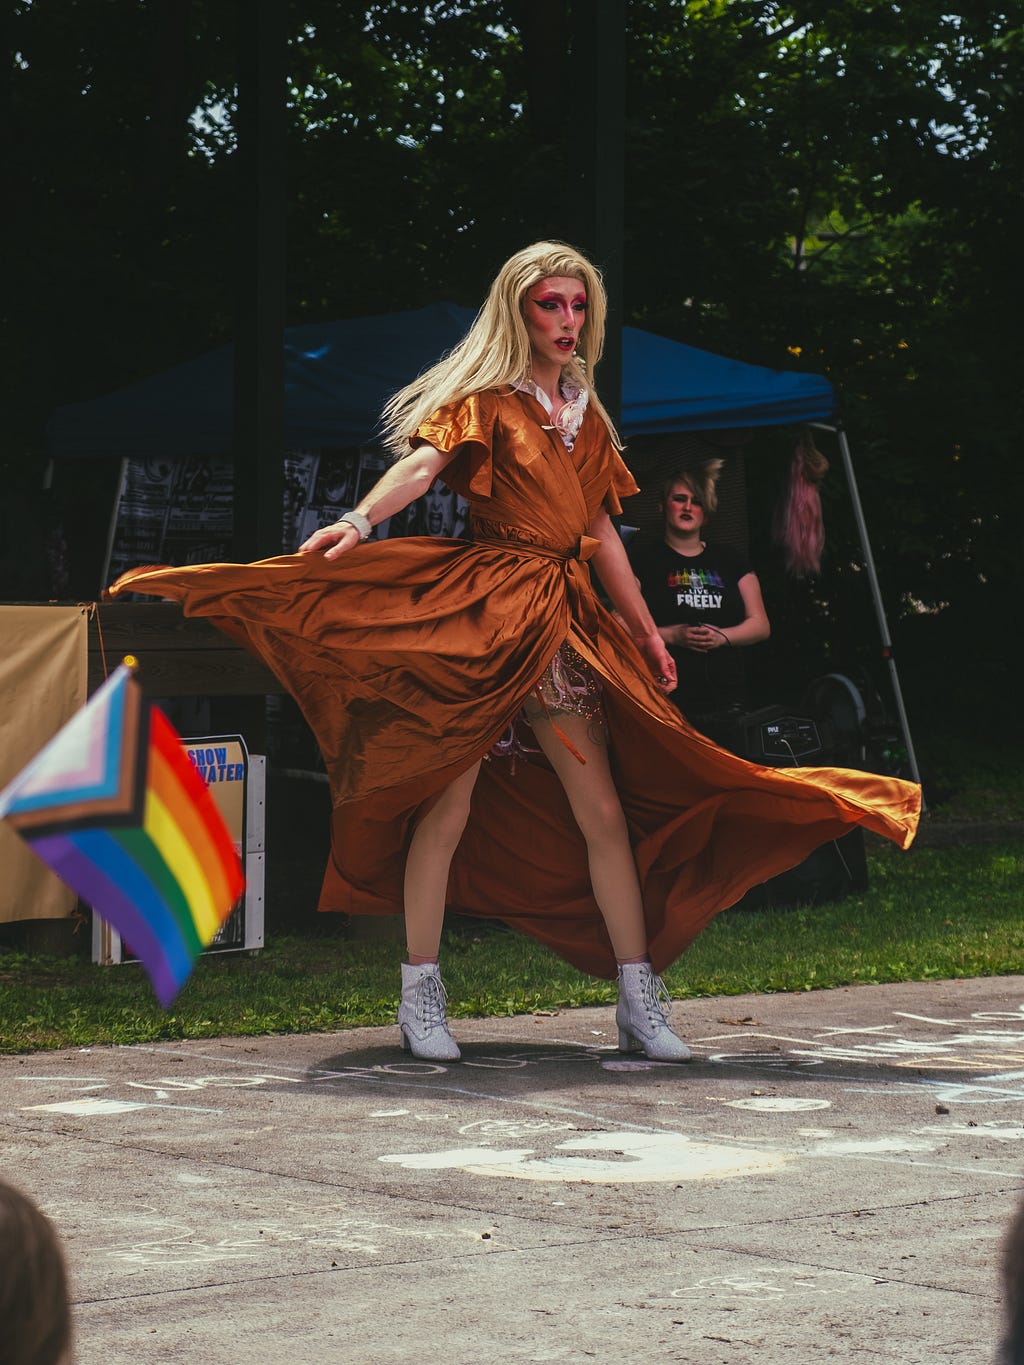 A drag queen spinning in an orange dress with white high heeled shoes & a white wig. A Pride flag can be seen in the foreground